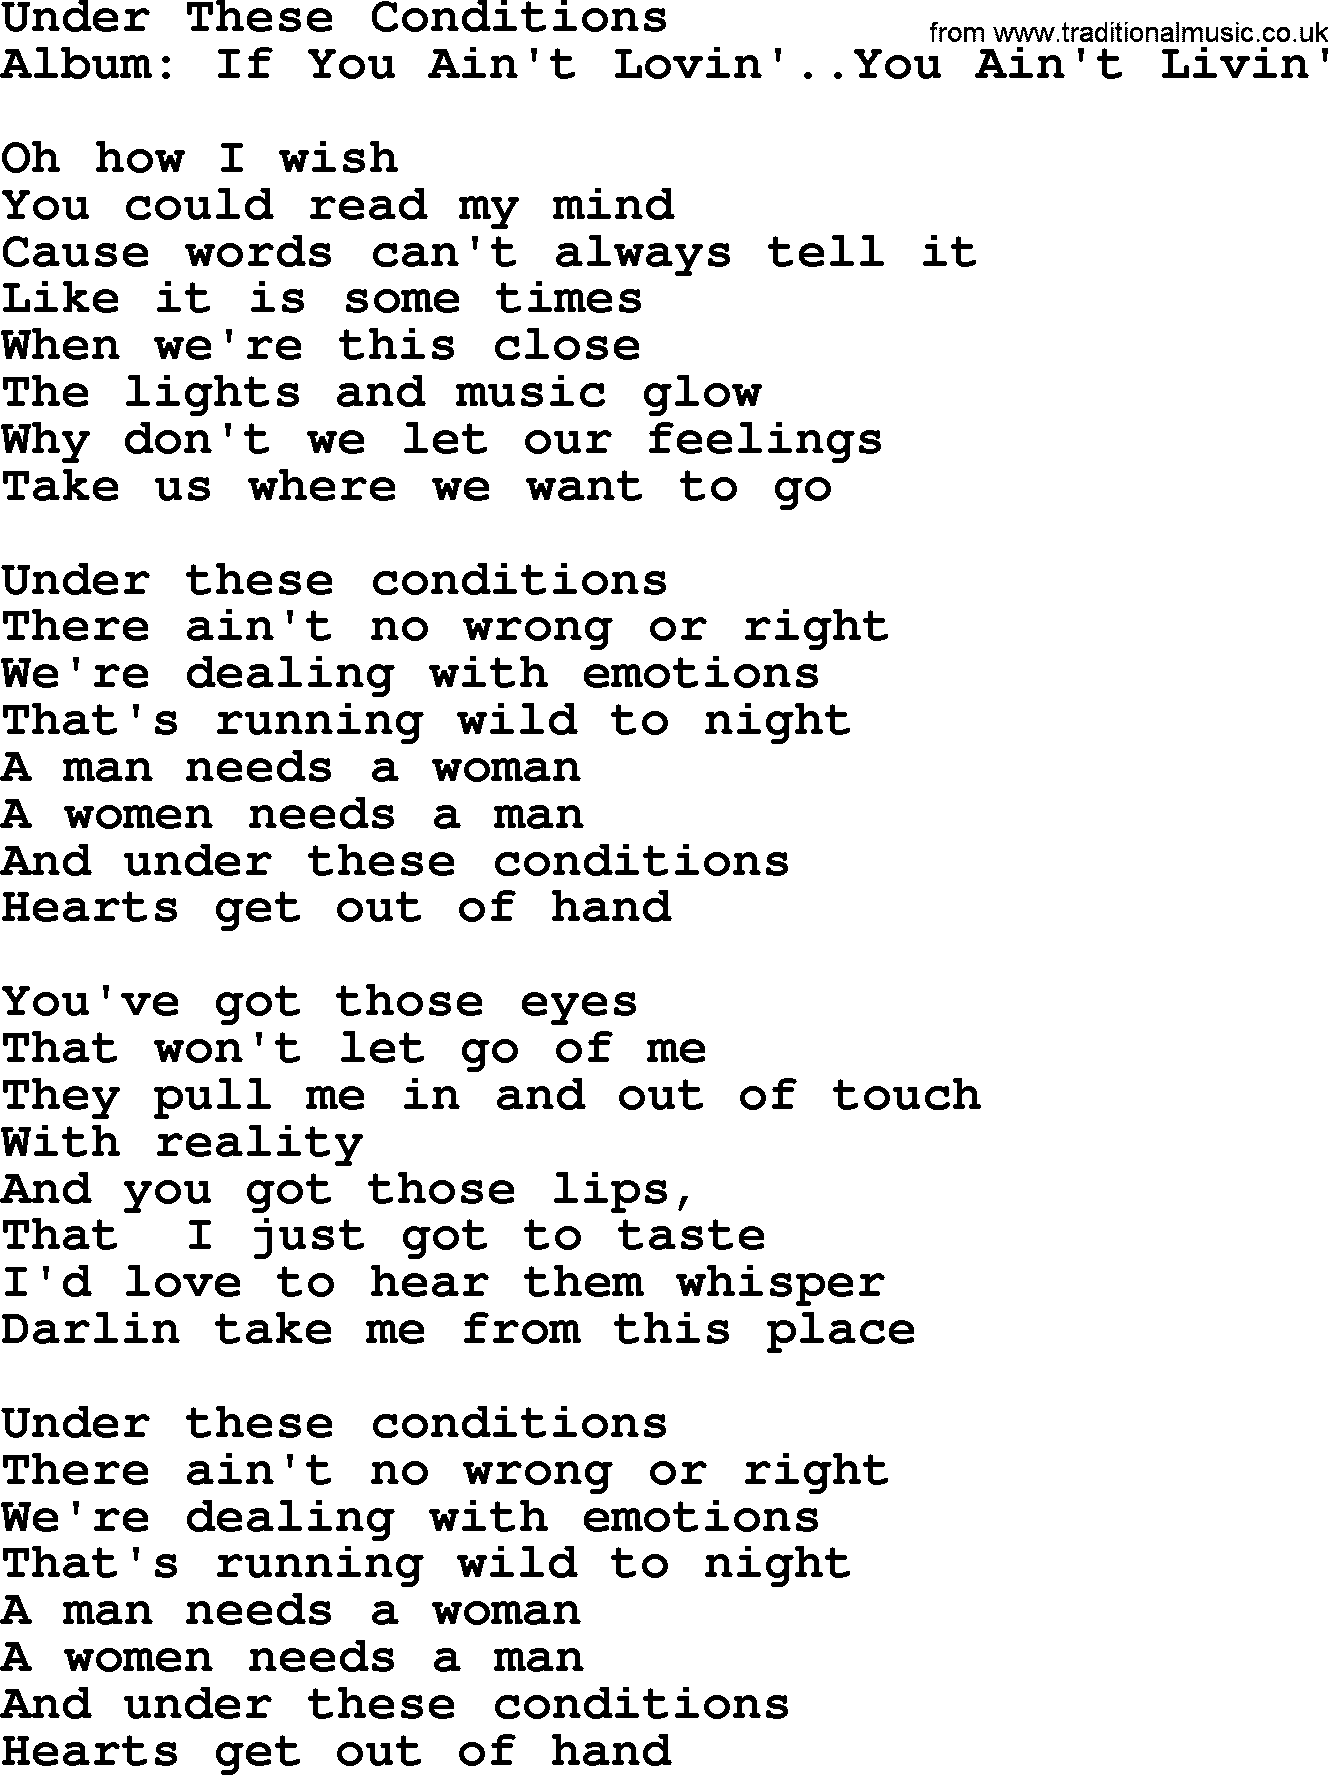 George Strait song: Under These Conditions, lyrics